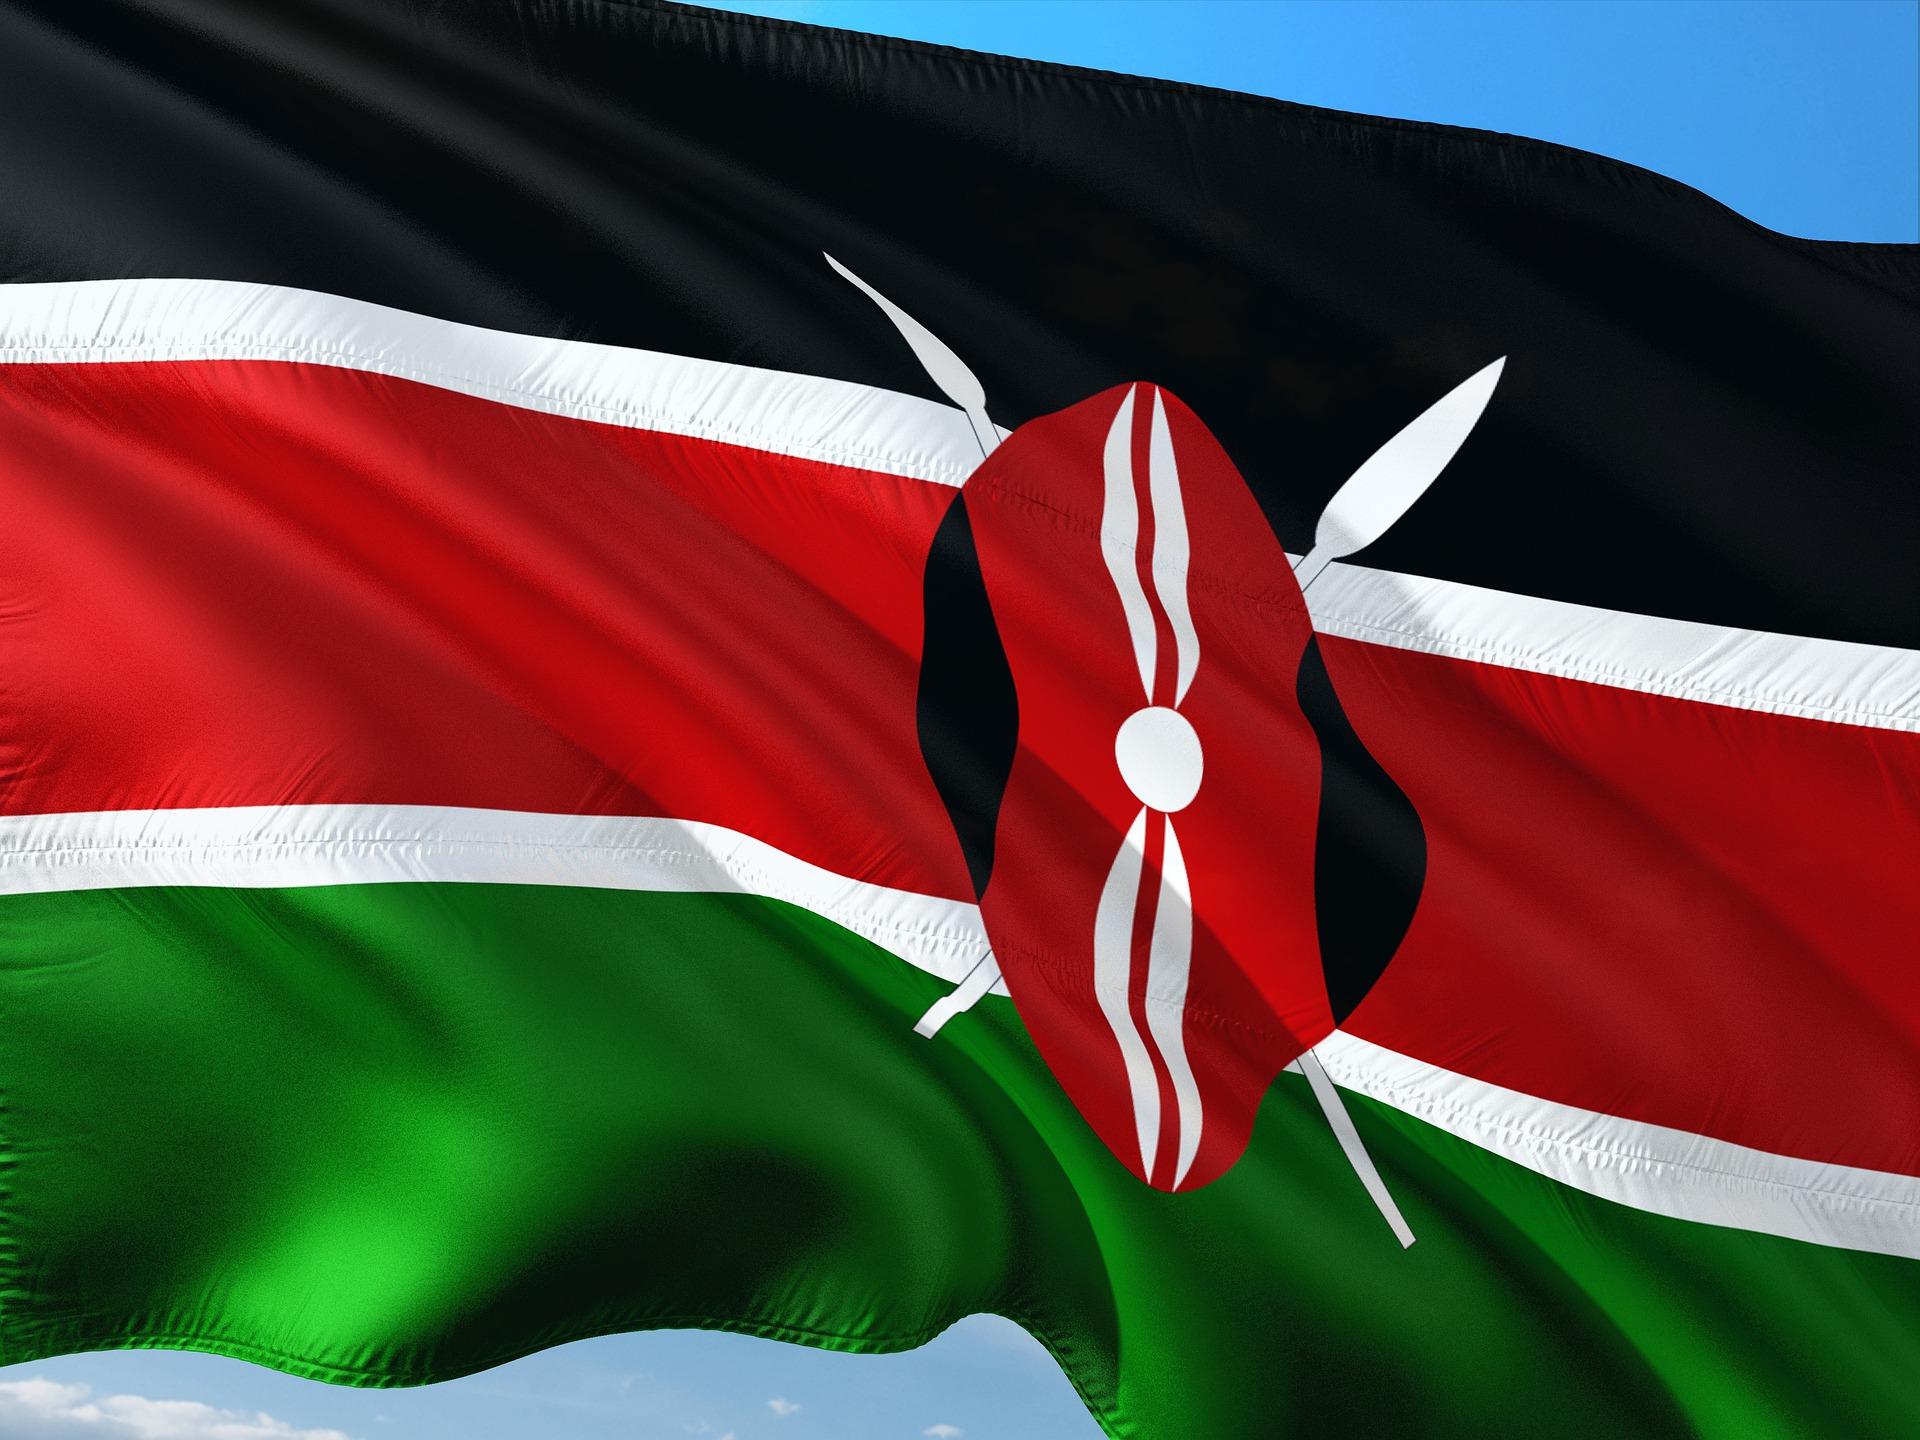 Flag of Kenya, blowing in the wind against a clear blue sky